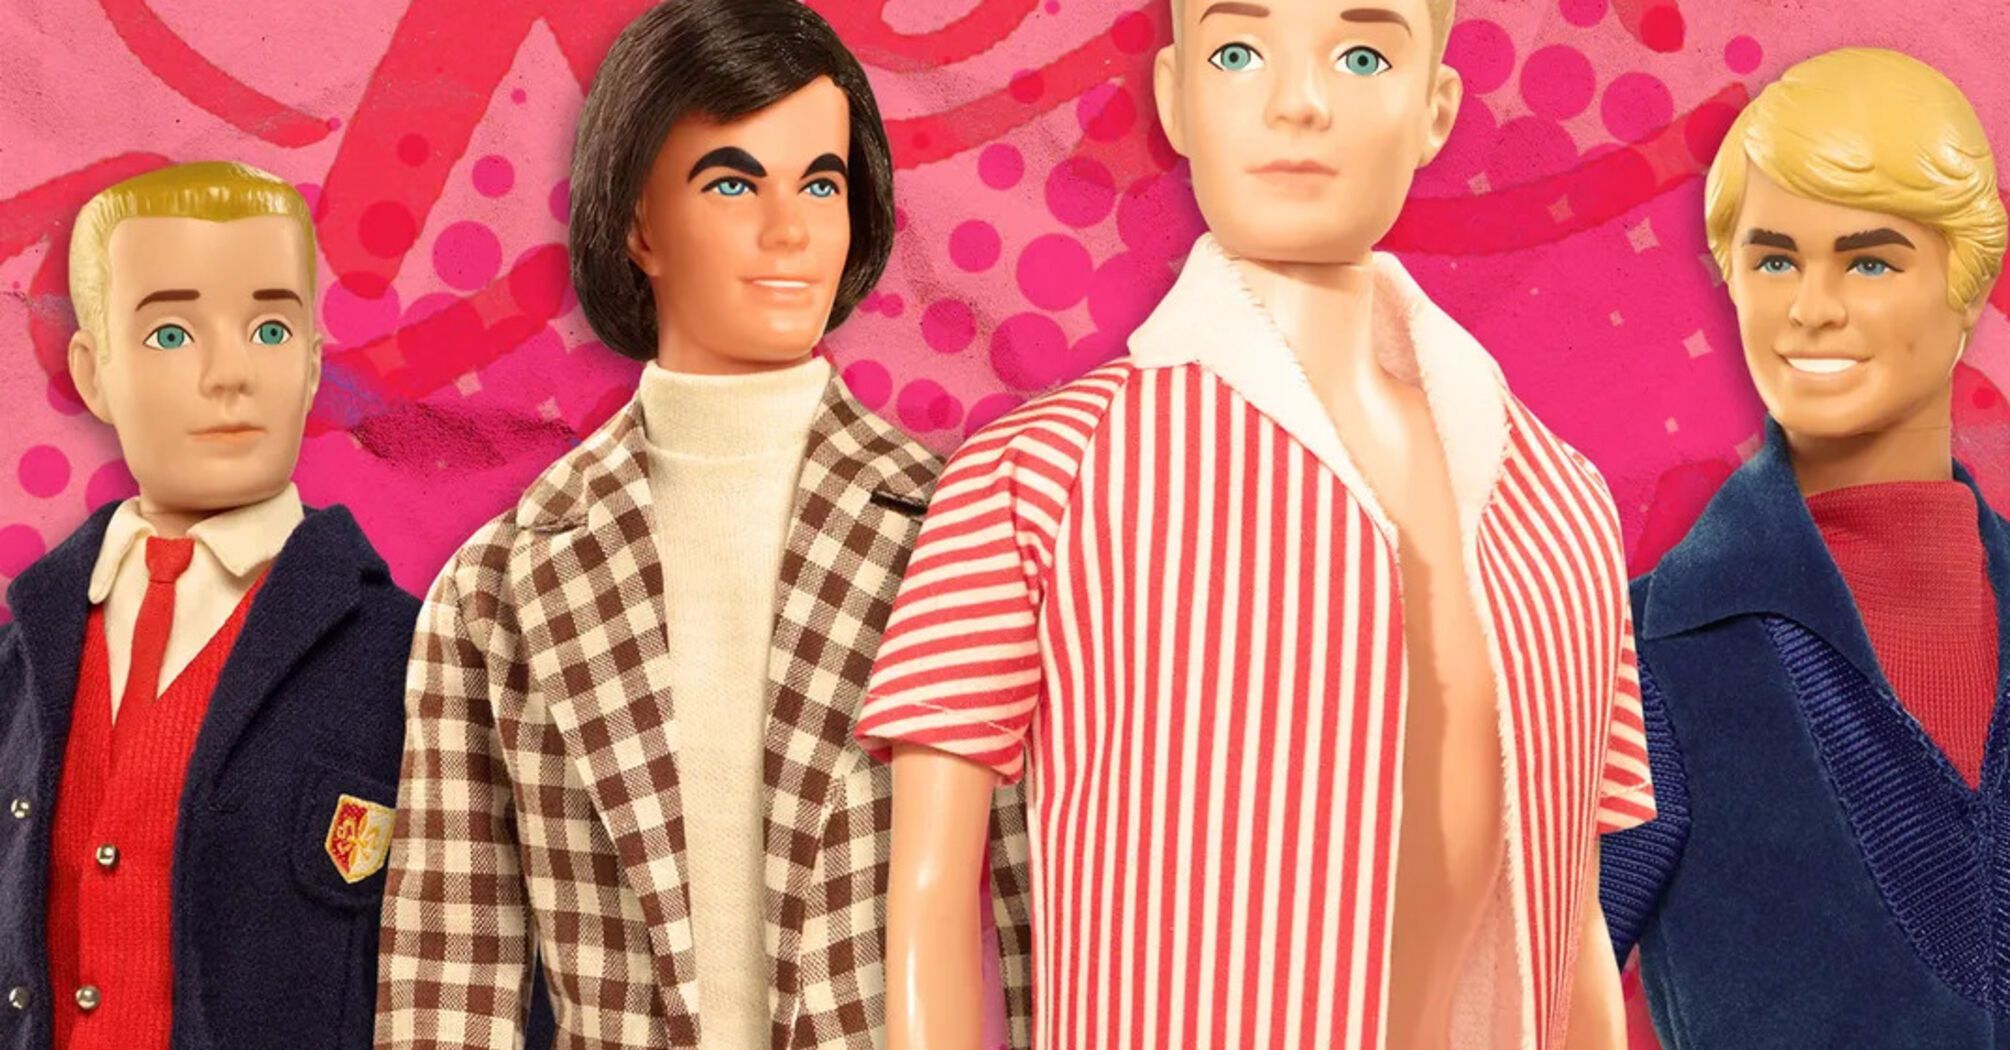 How Barbie's friend Ken has changed over the years